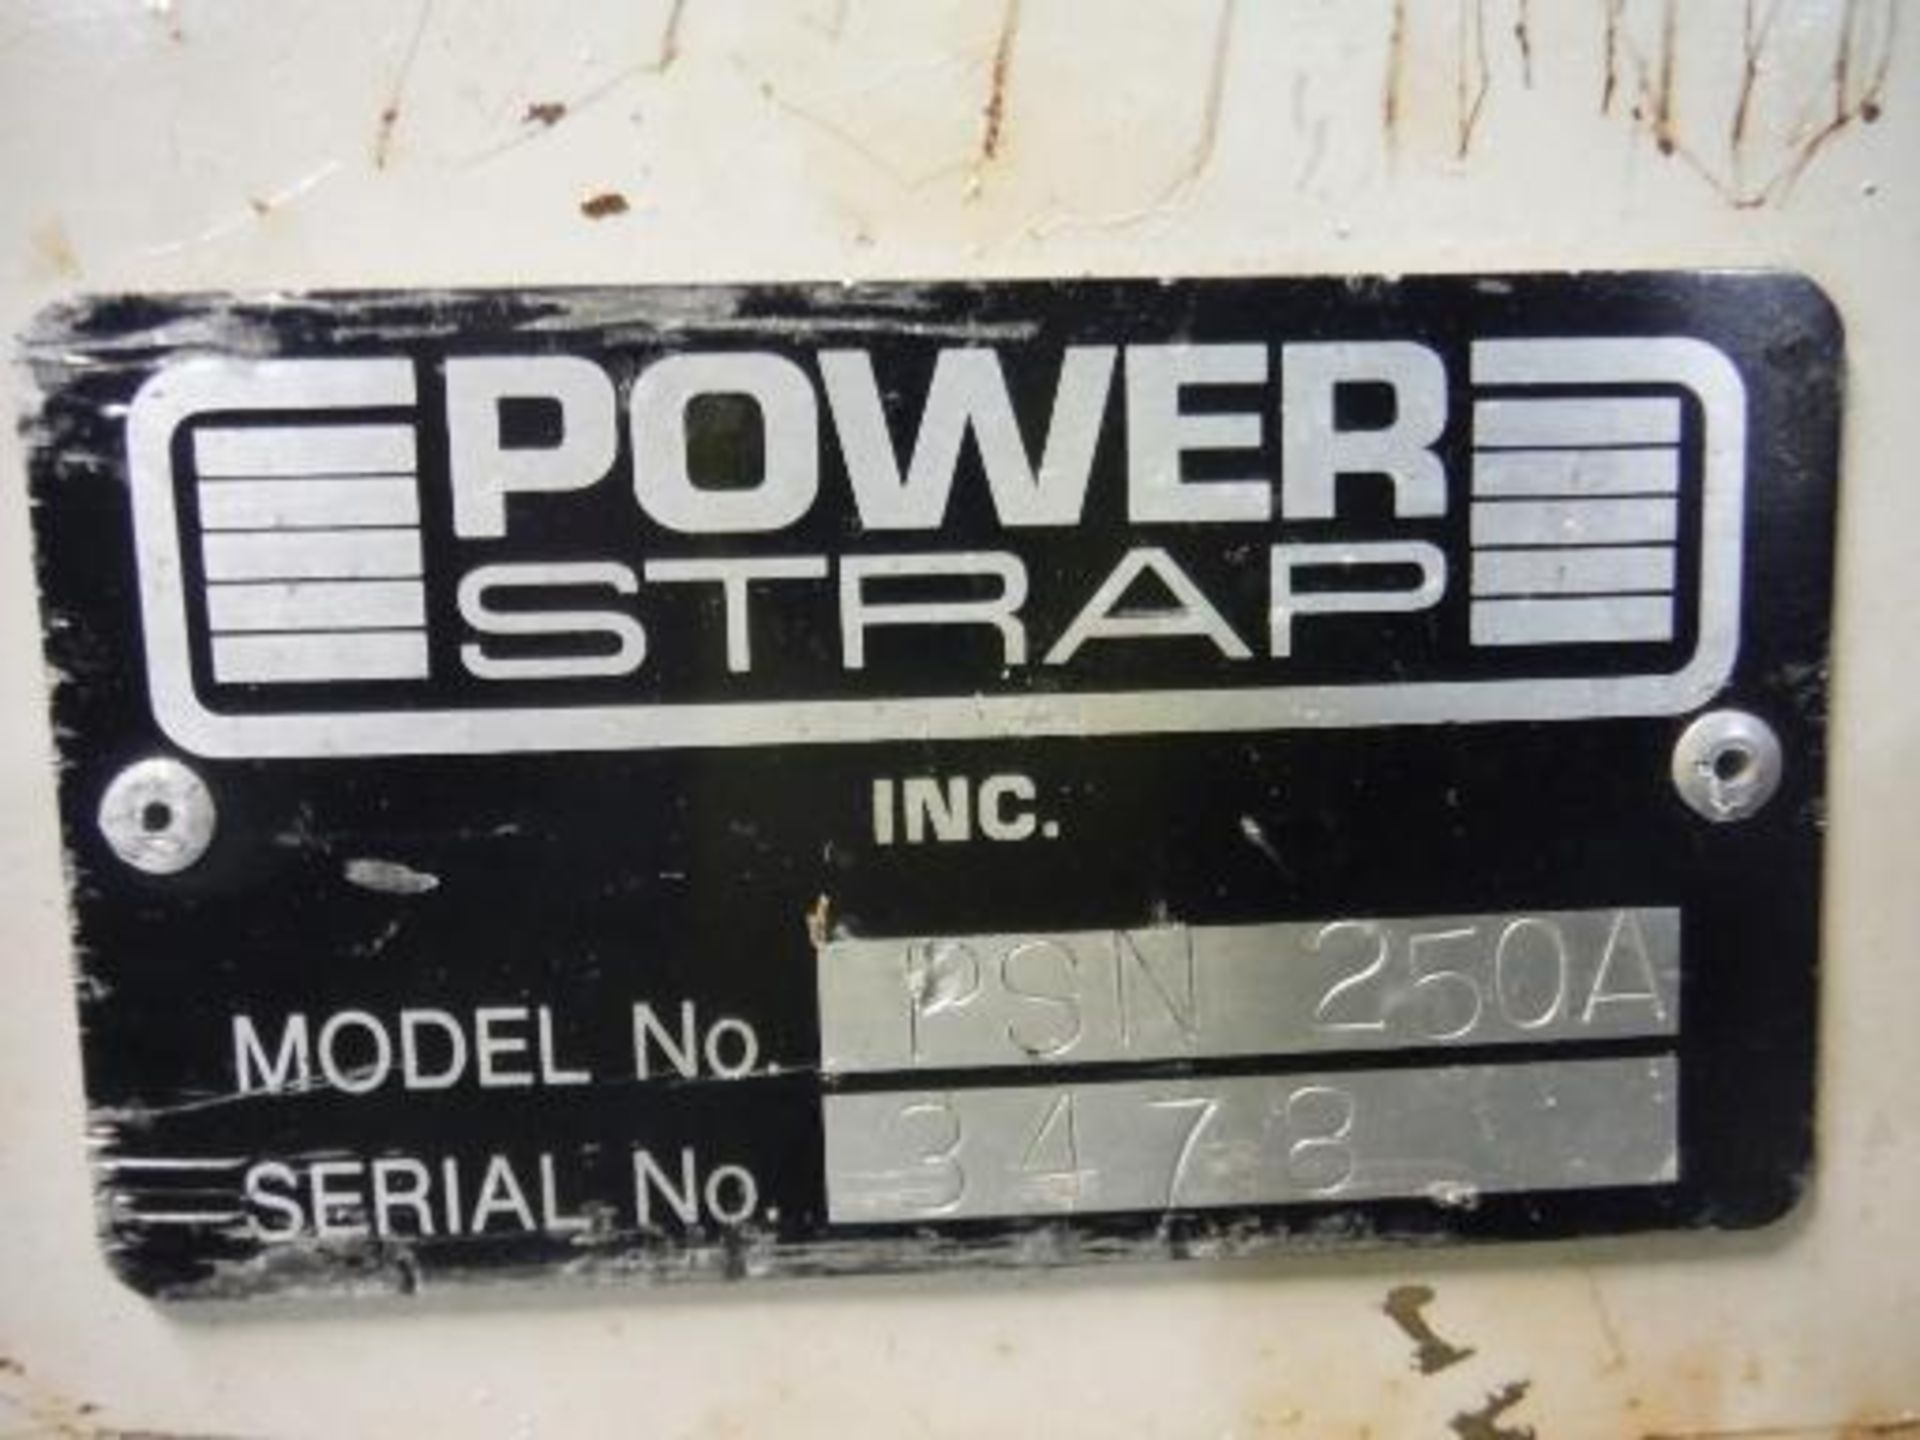 Interpower Power-250A Banding machine, Model PSN 250A, SN 3478, mild steel frame This item is - Image 5 of 5